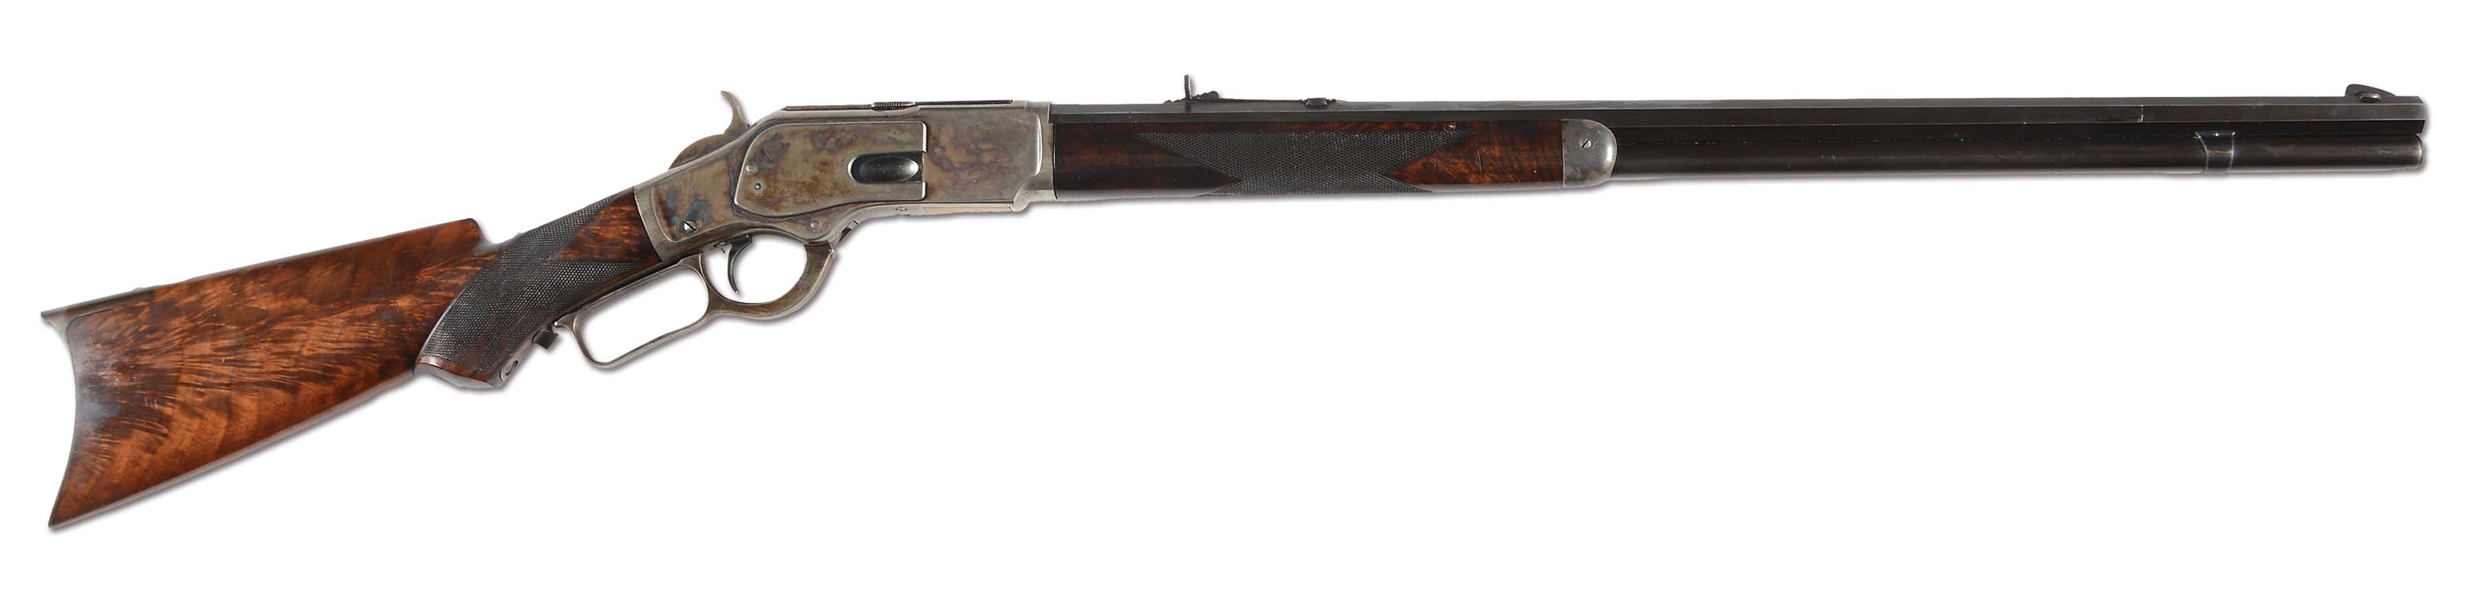 (A) WINCHESTER 3RD MODEL 1873 DELUXE LEVER ACTION RIFLE (1887).